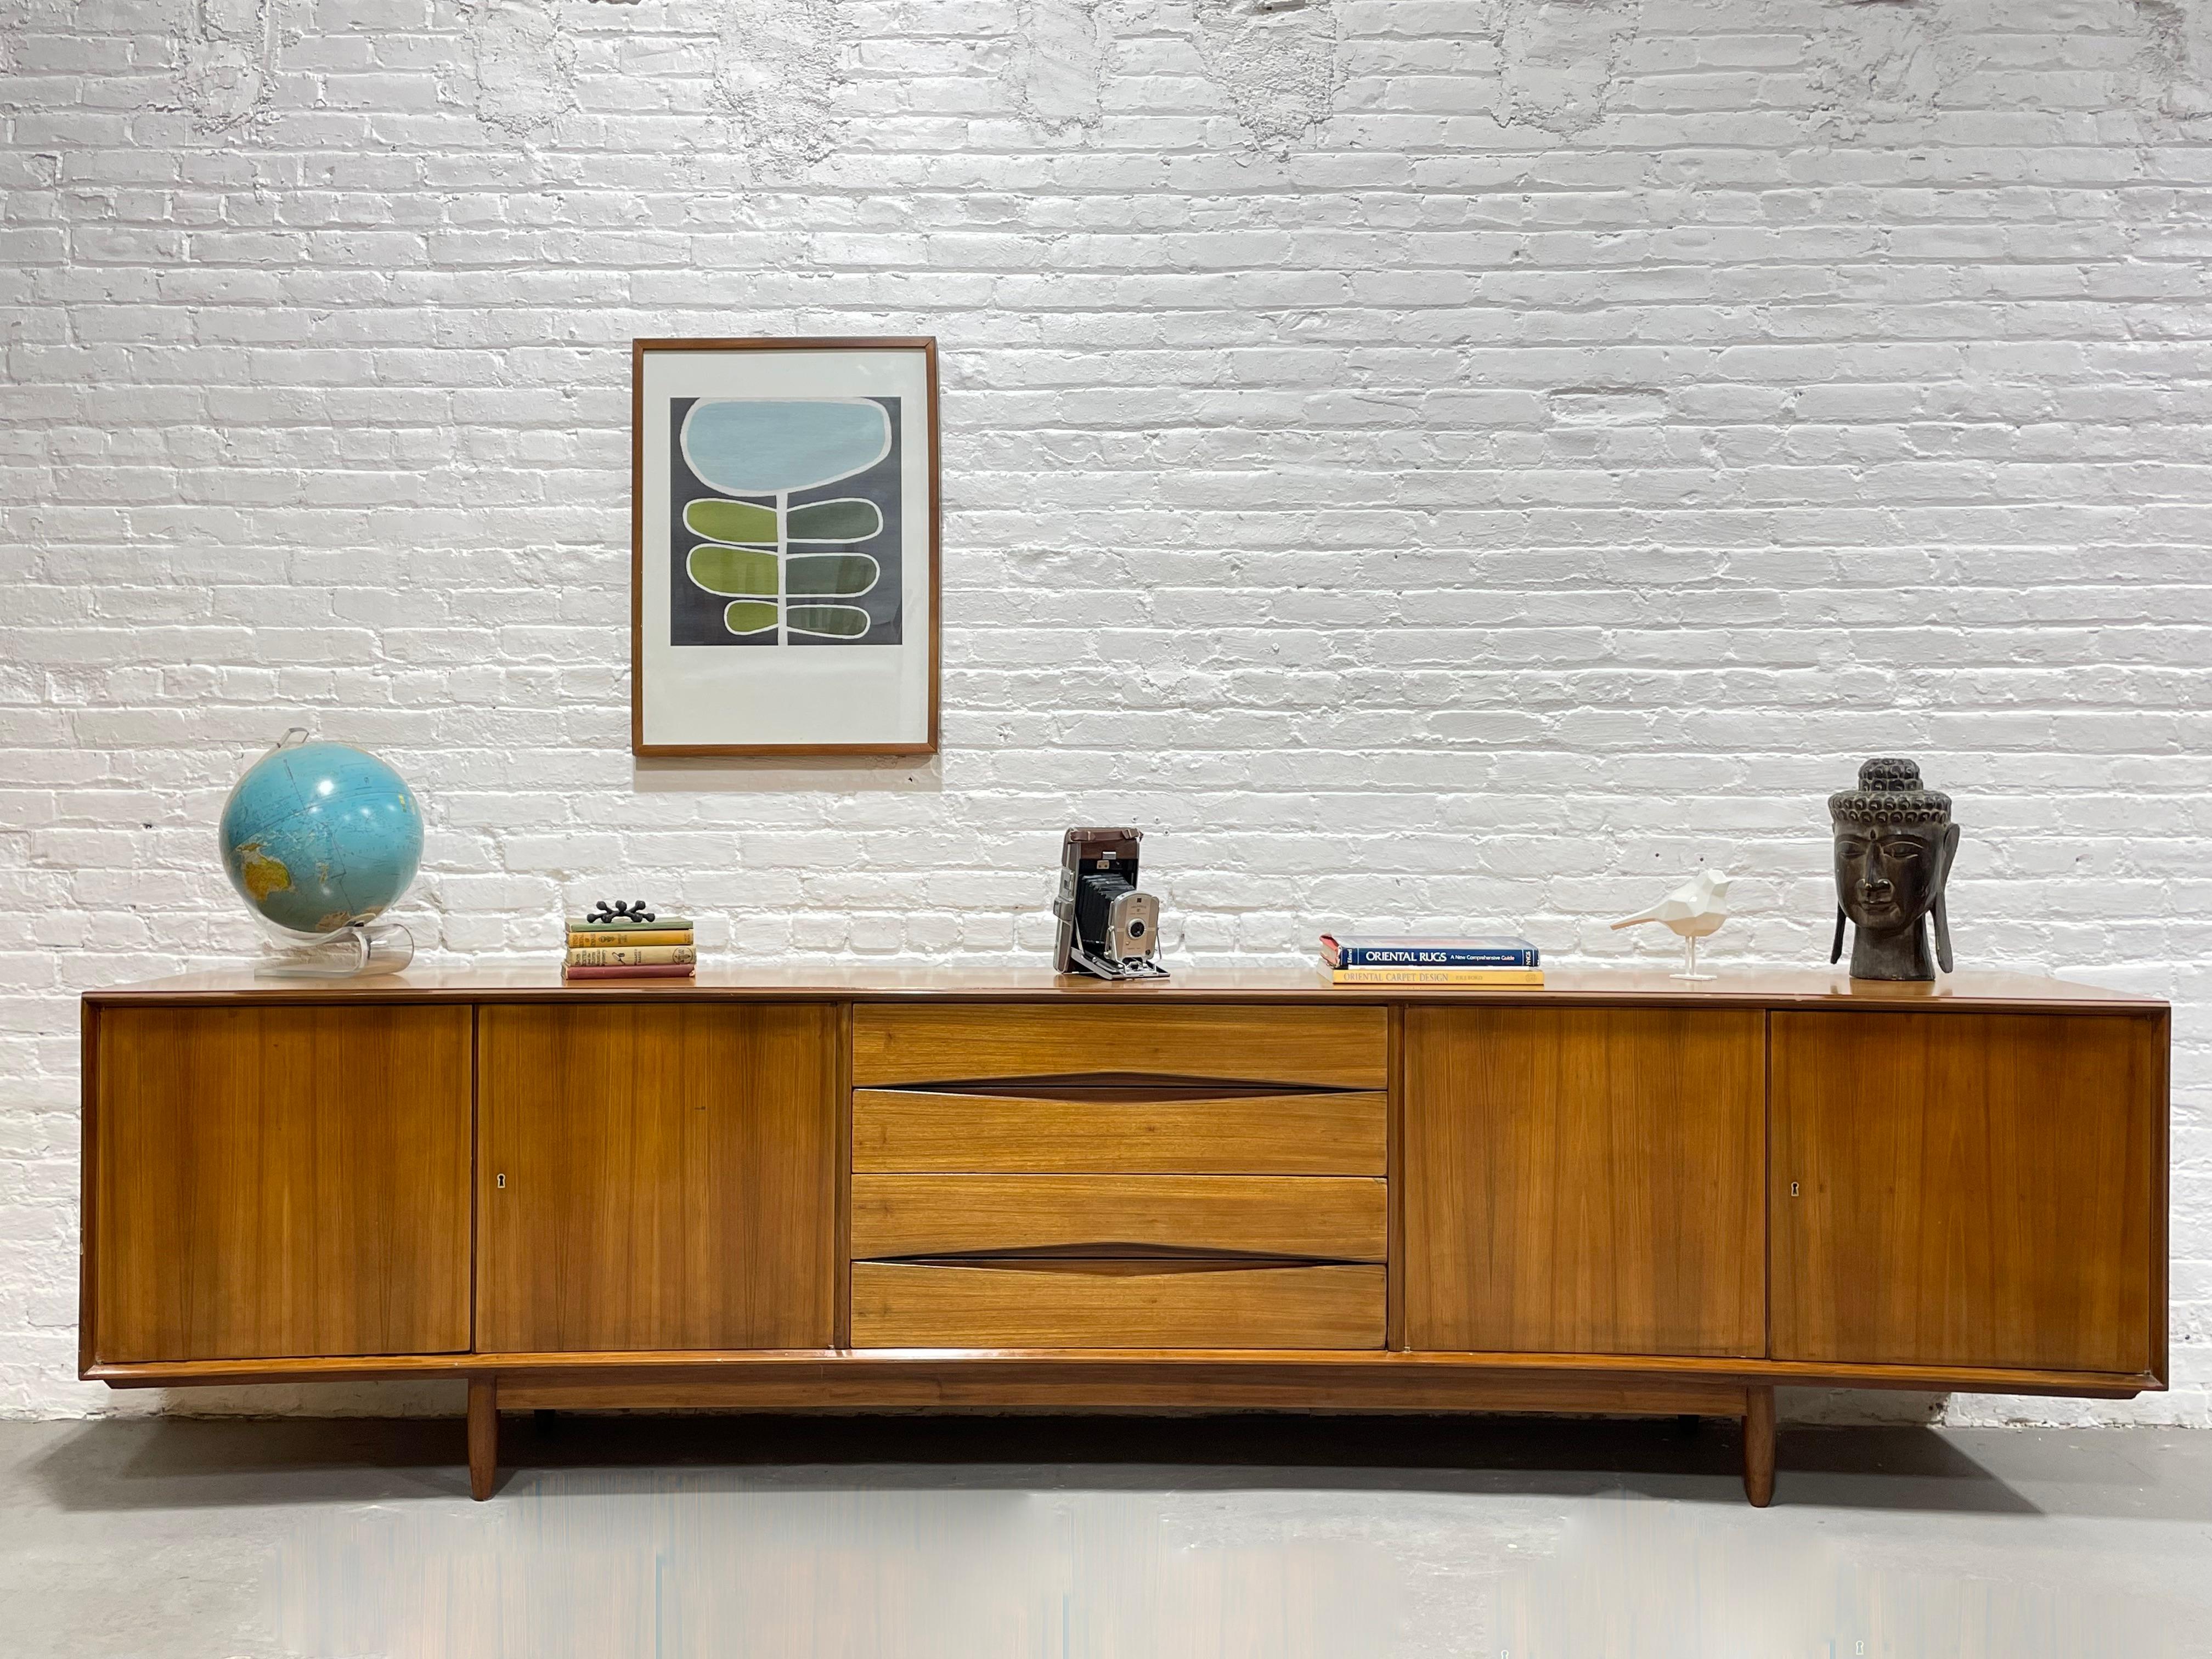 EXTRA LONG and just plain “EXTRA” in every sense. This monumental Mid Century Modern credenza is an absolute showstopper in a nearly impossible to find length of nearly 10 feet. This tremendous piece boasts a gentle curvature along the front, a